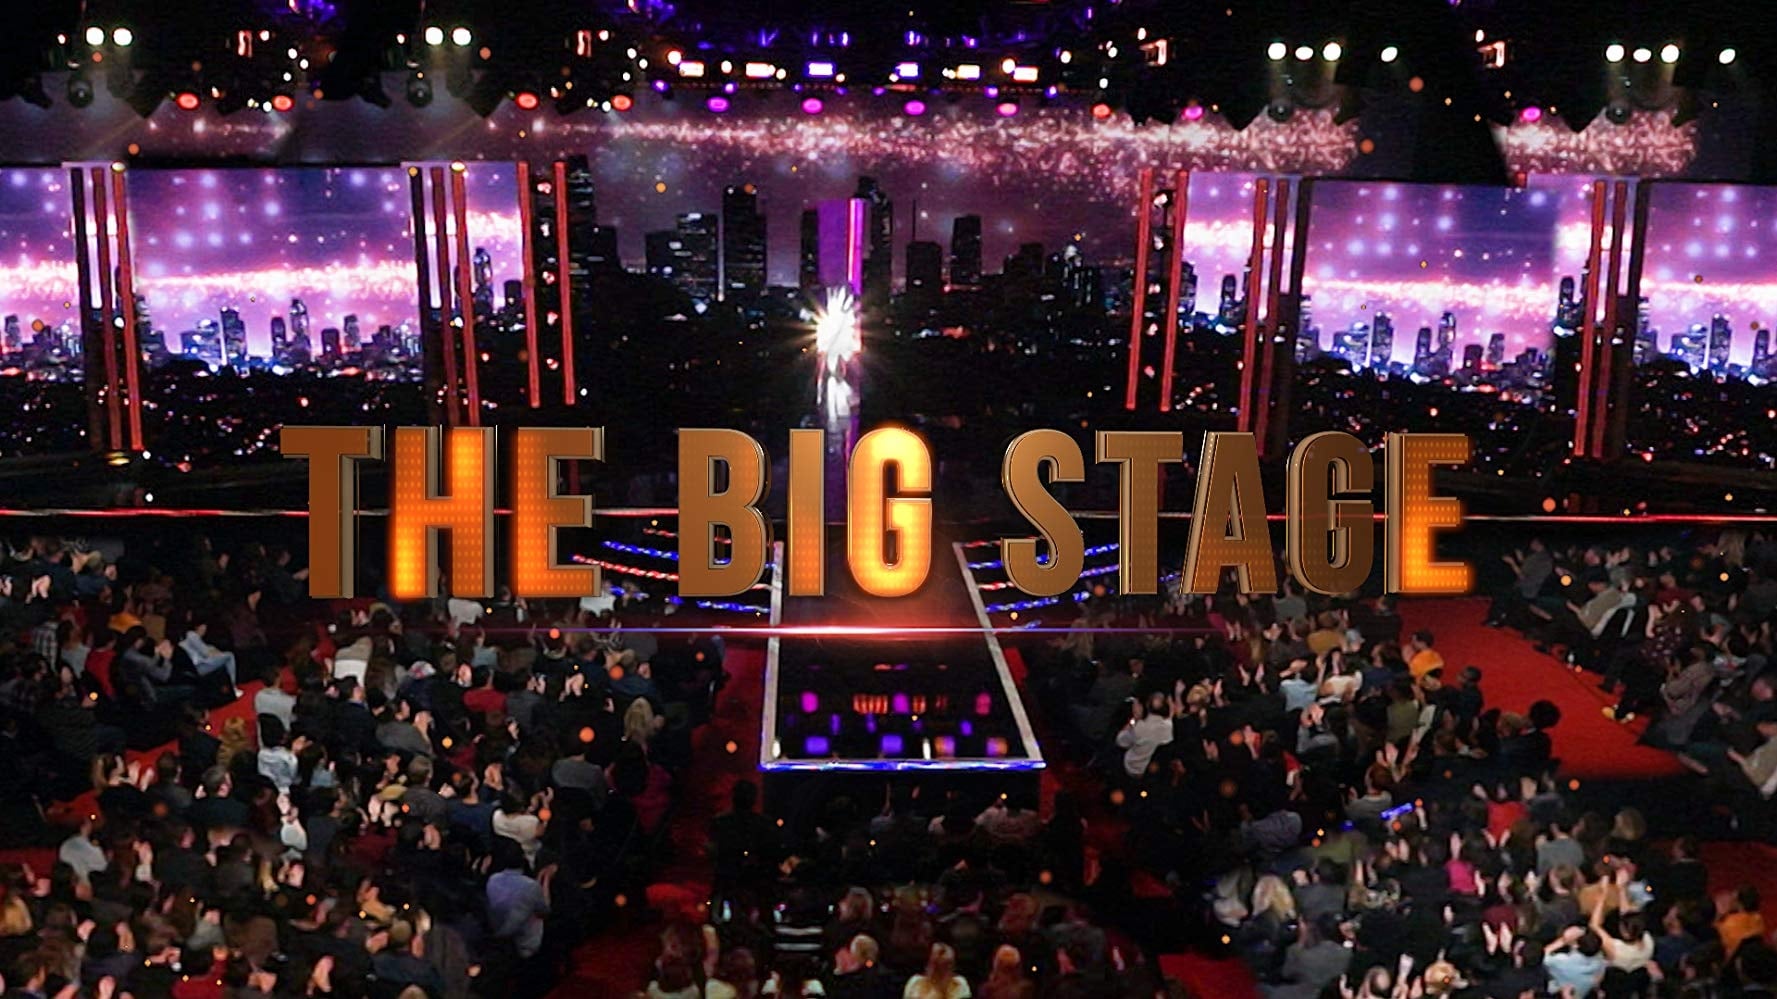 The Big Stage